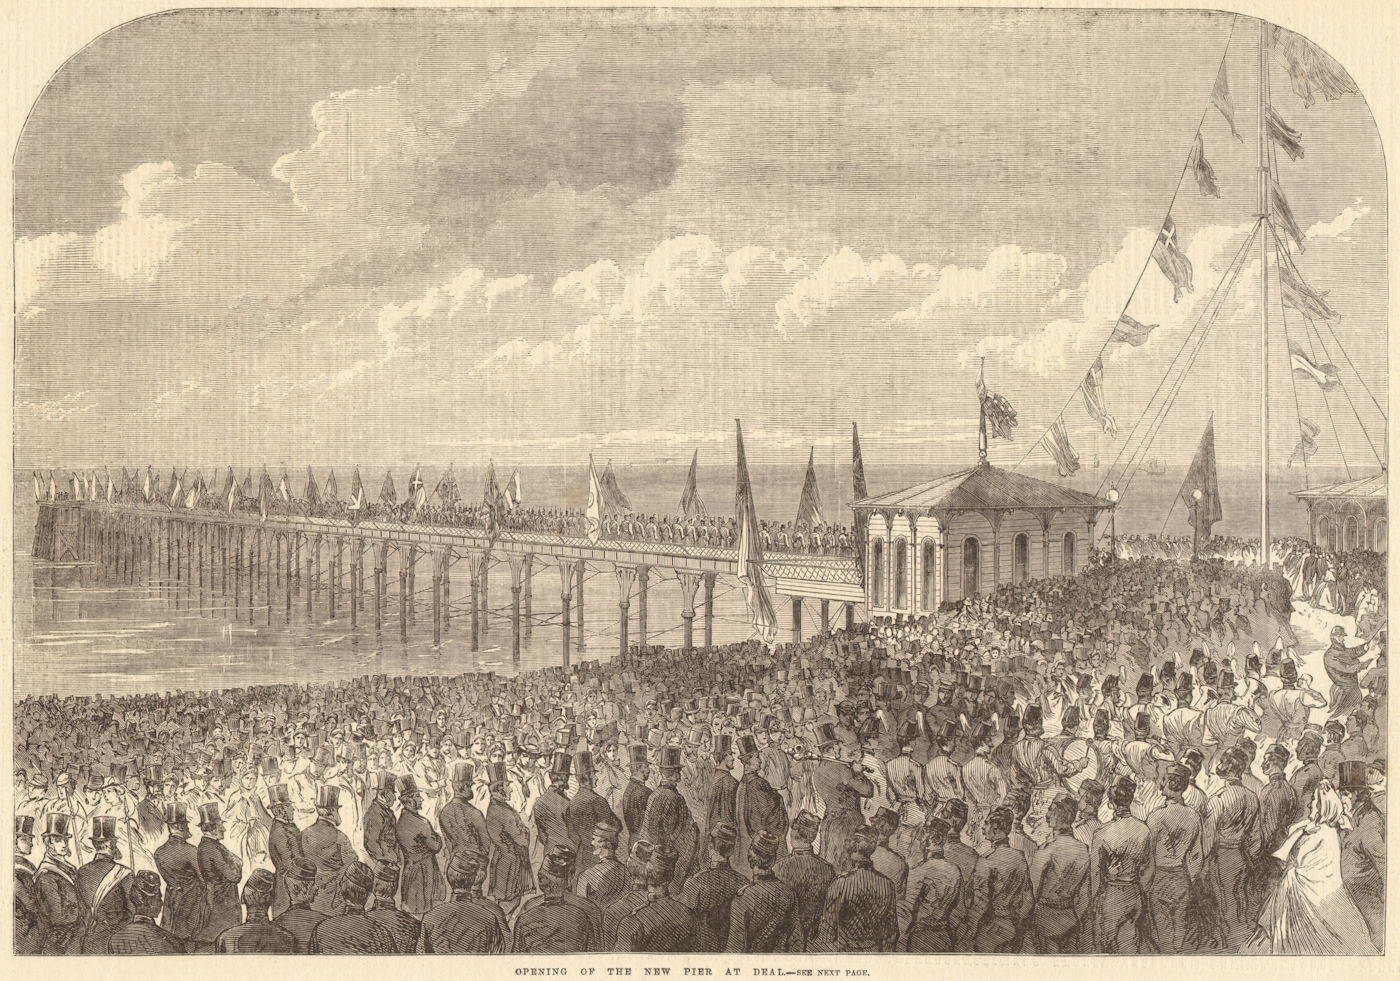 Associate Product Opening of the new pier at Deal. Kent 1864 antique ILN full page print